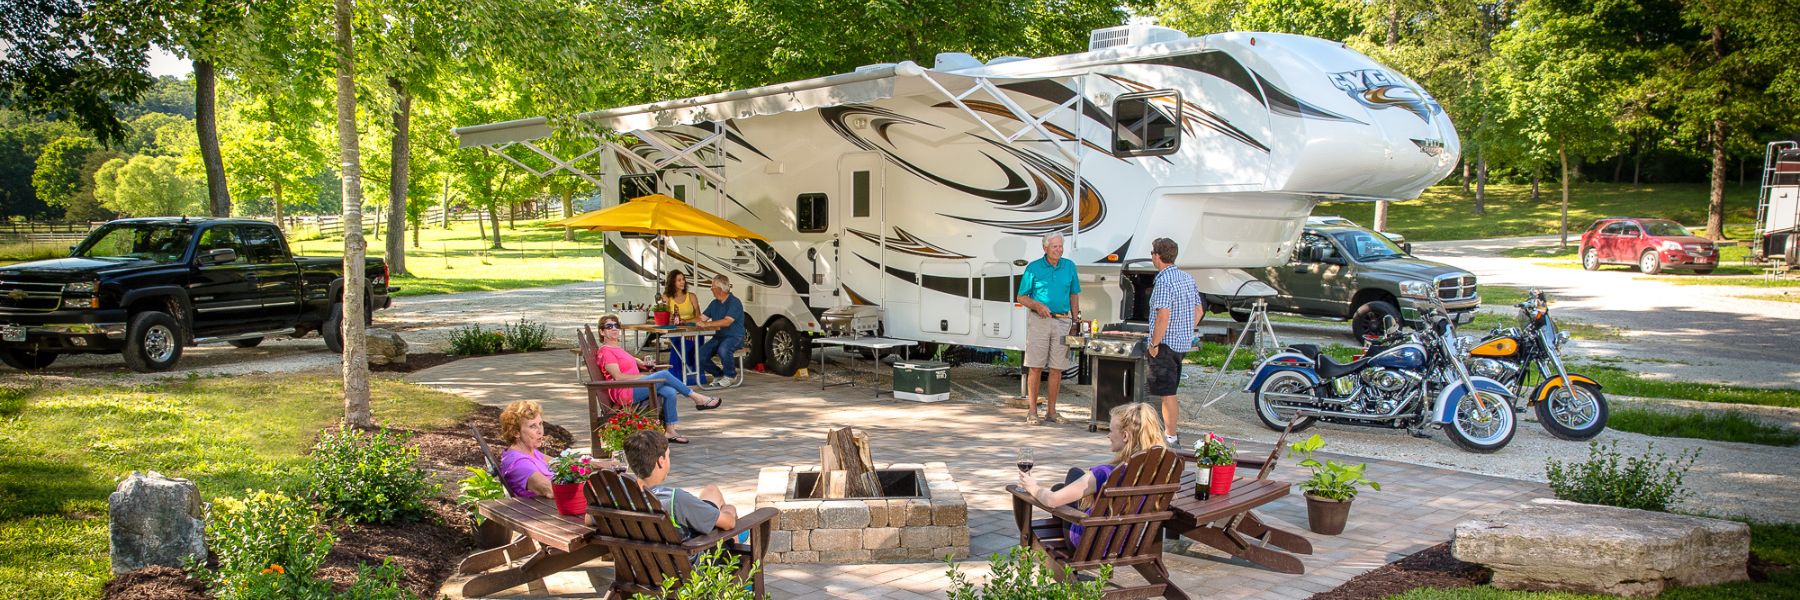 A family enjoys a stop in St. Louis on their RV adventure.